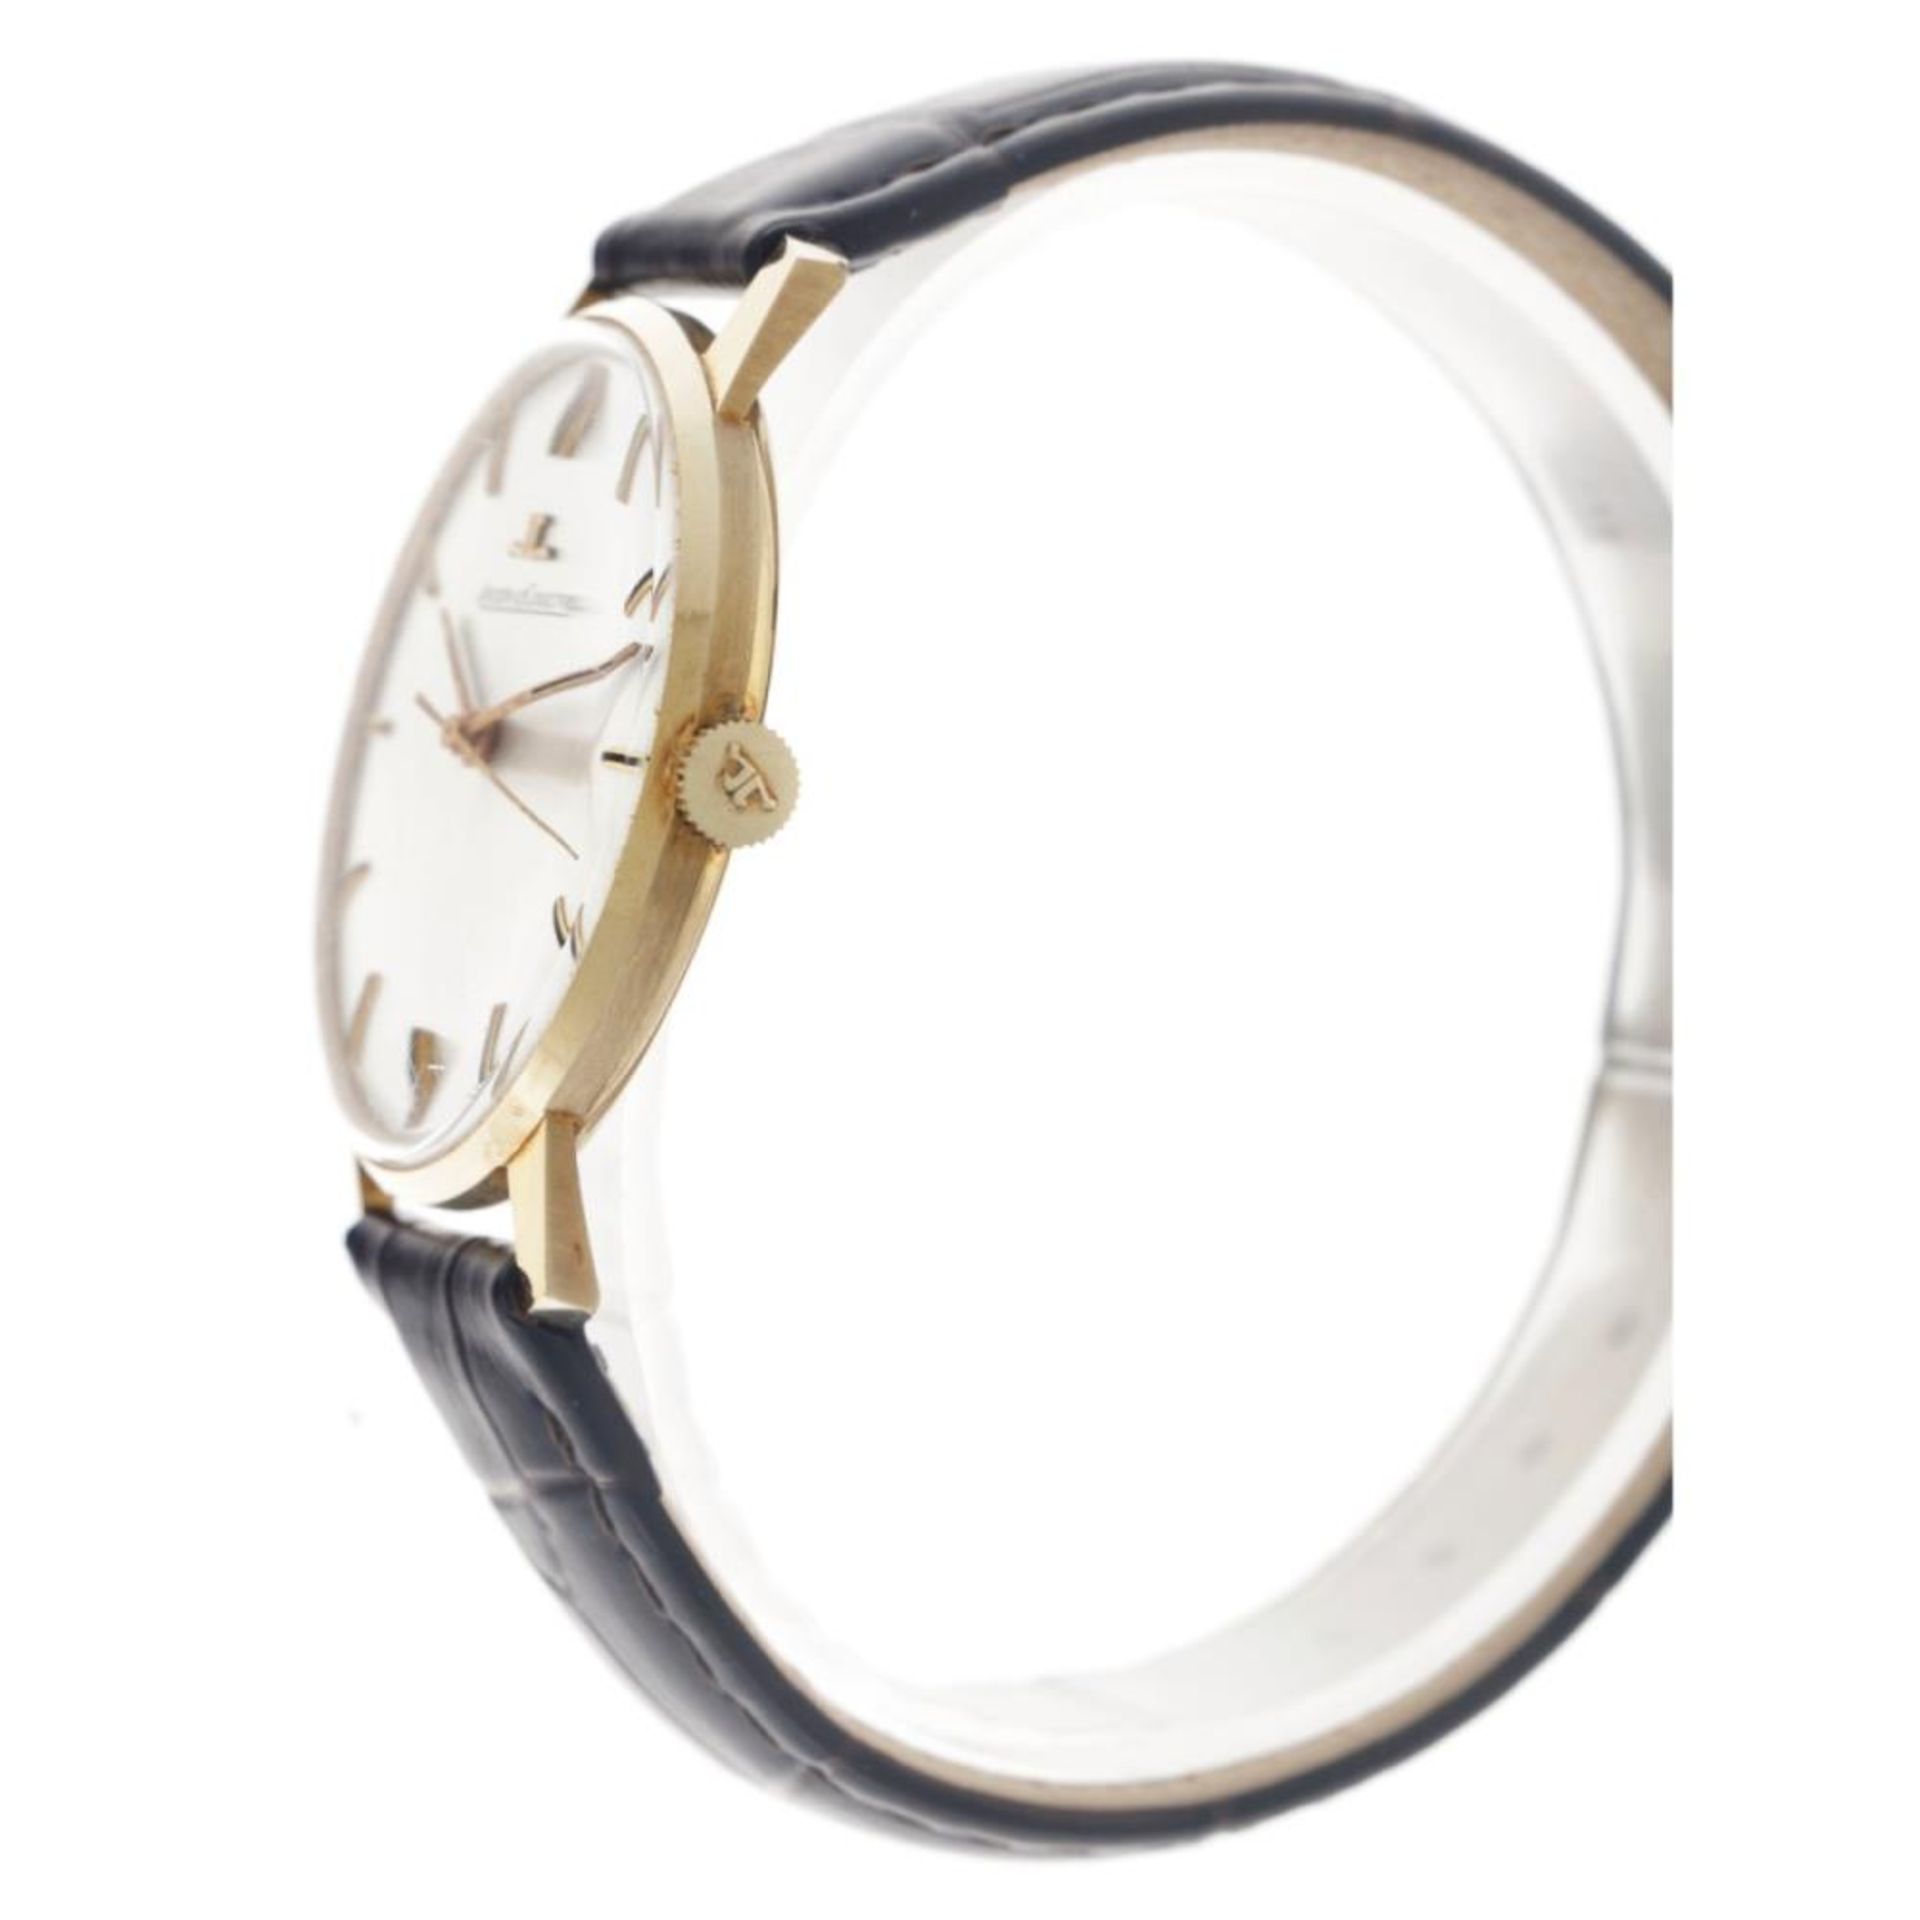 Jaeger-LeCoultre vintage dress watch 20007 -Men's watch - approx. 1965. - Image 9 of 10